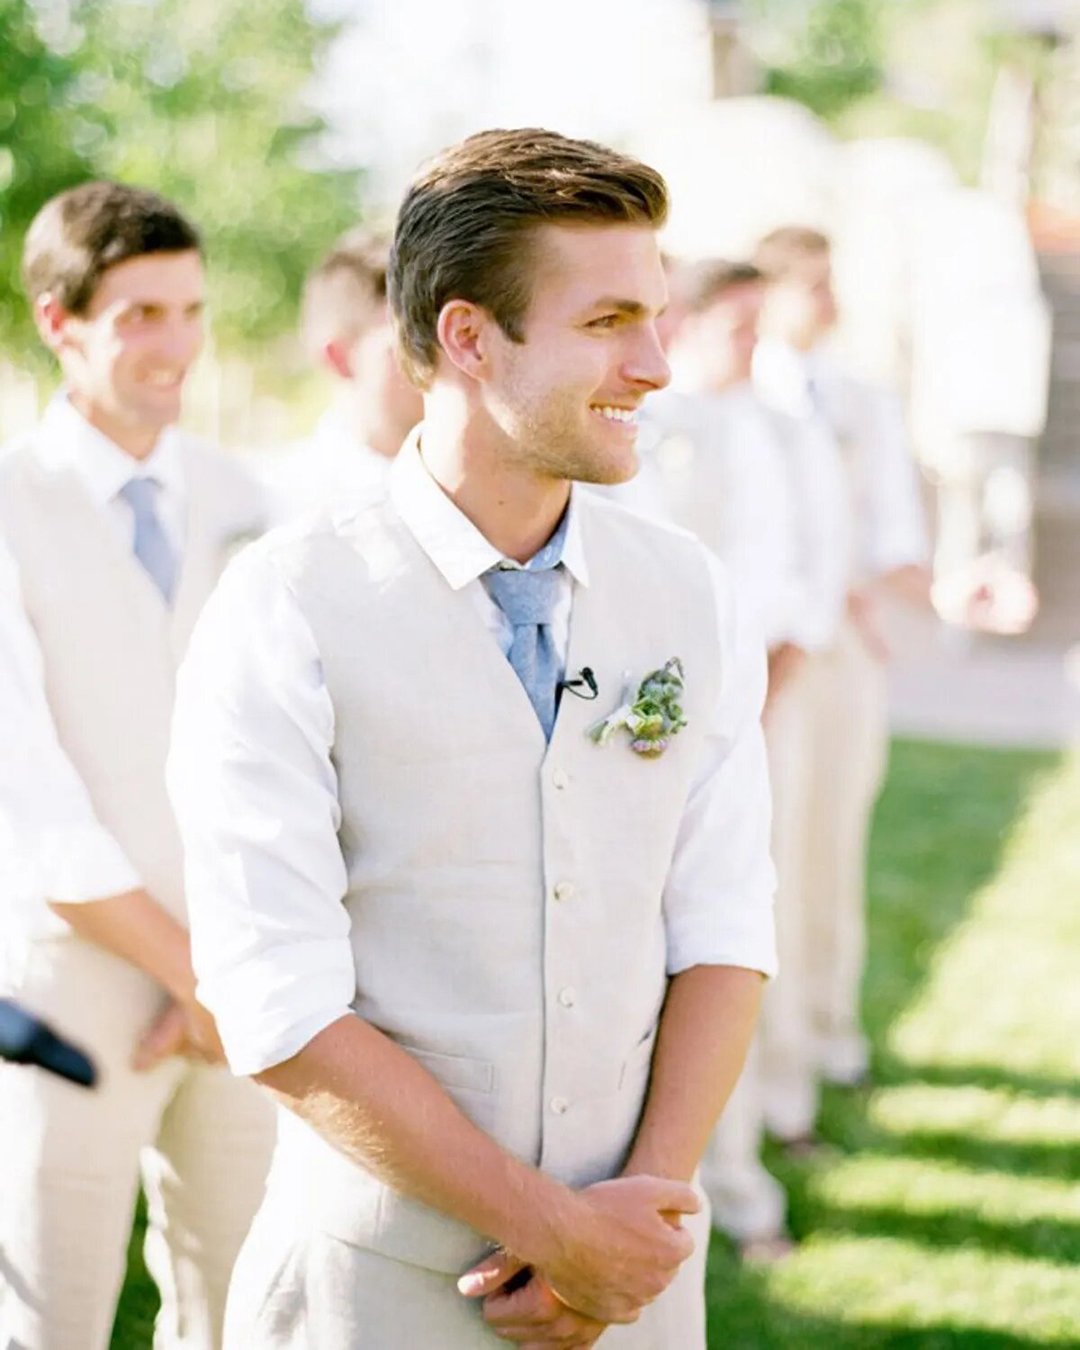 groomsmen attire vest white with tie and boutonniere Leo Patrone photography,